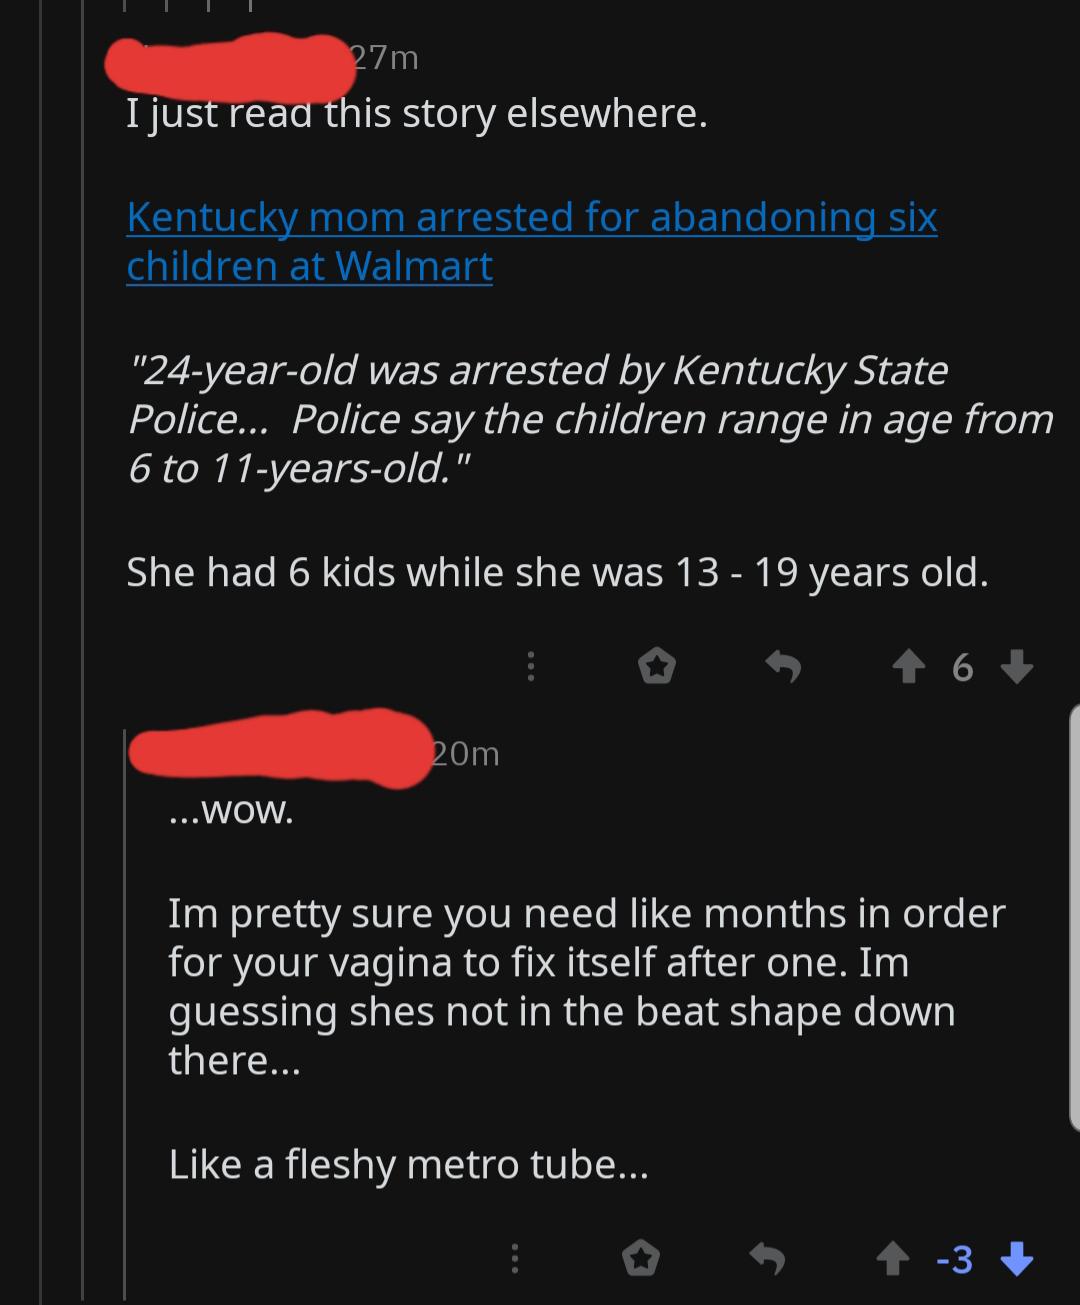 screenshot - 27m I just read this story elsewhere. Kentucky mom arrested for abandoning six children at Walmart "24yearold was arrested by Kentucky State Police... Police say the children range in age from 6 to 11yearsold." She had 6 kids while she was 13